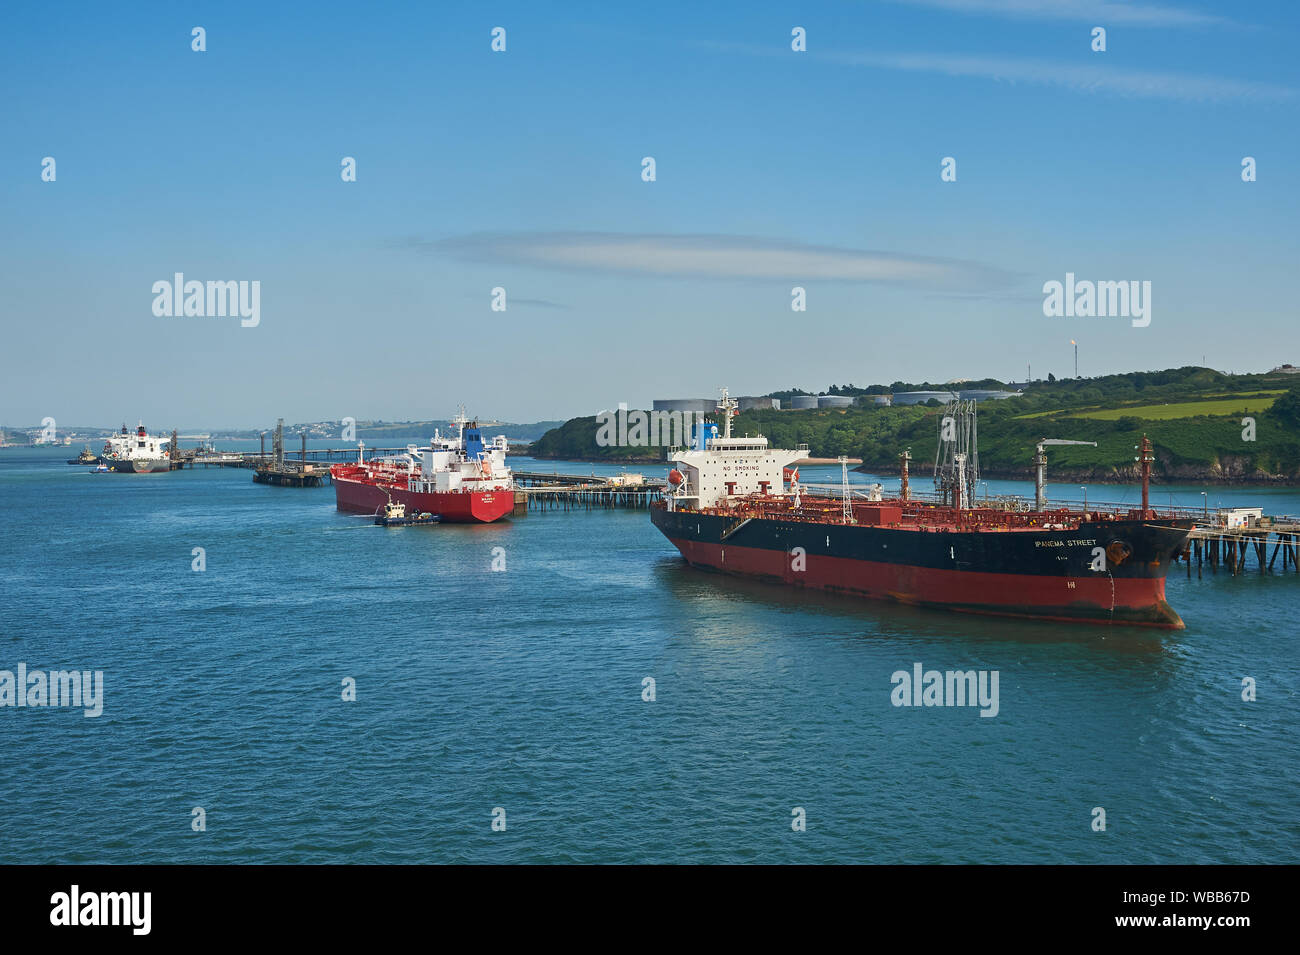 Oil and petro-chemical tankers moored to pontoons serving Milford Haven refineries in South Wales. Stock Photo